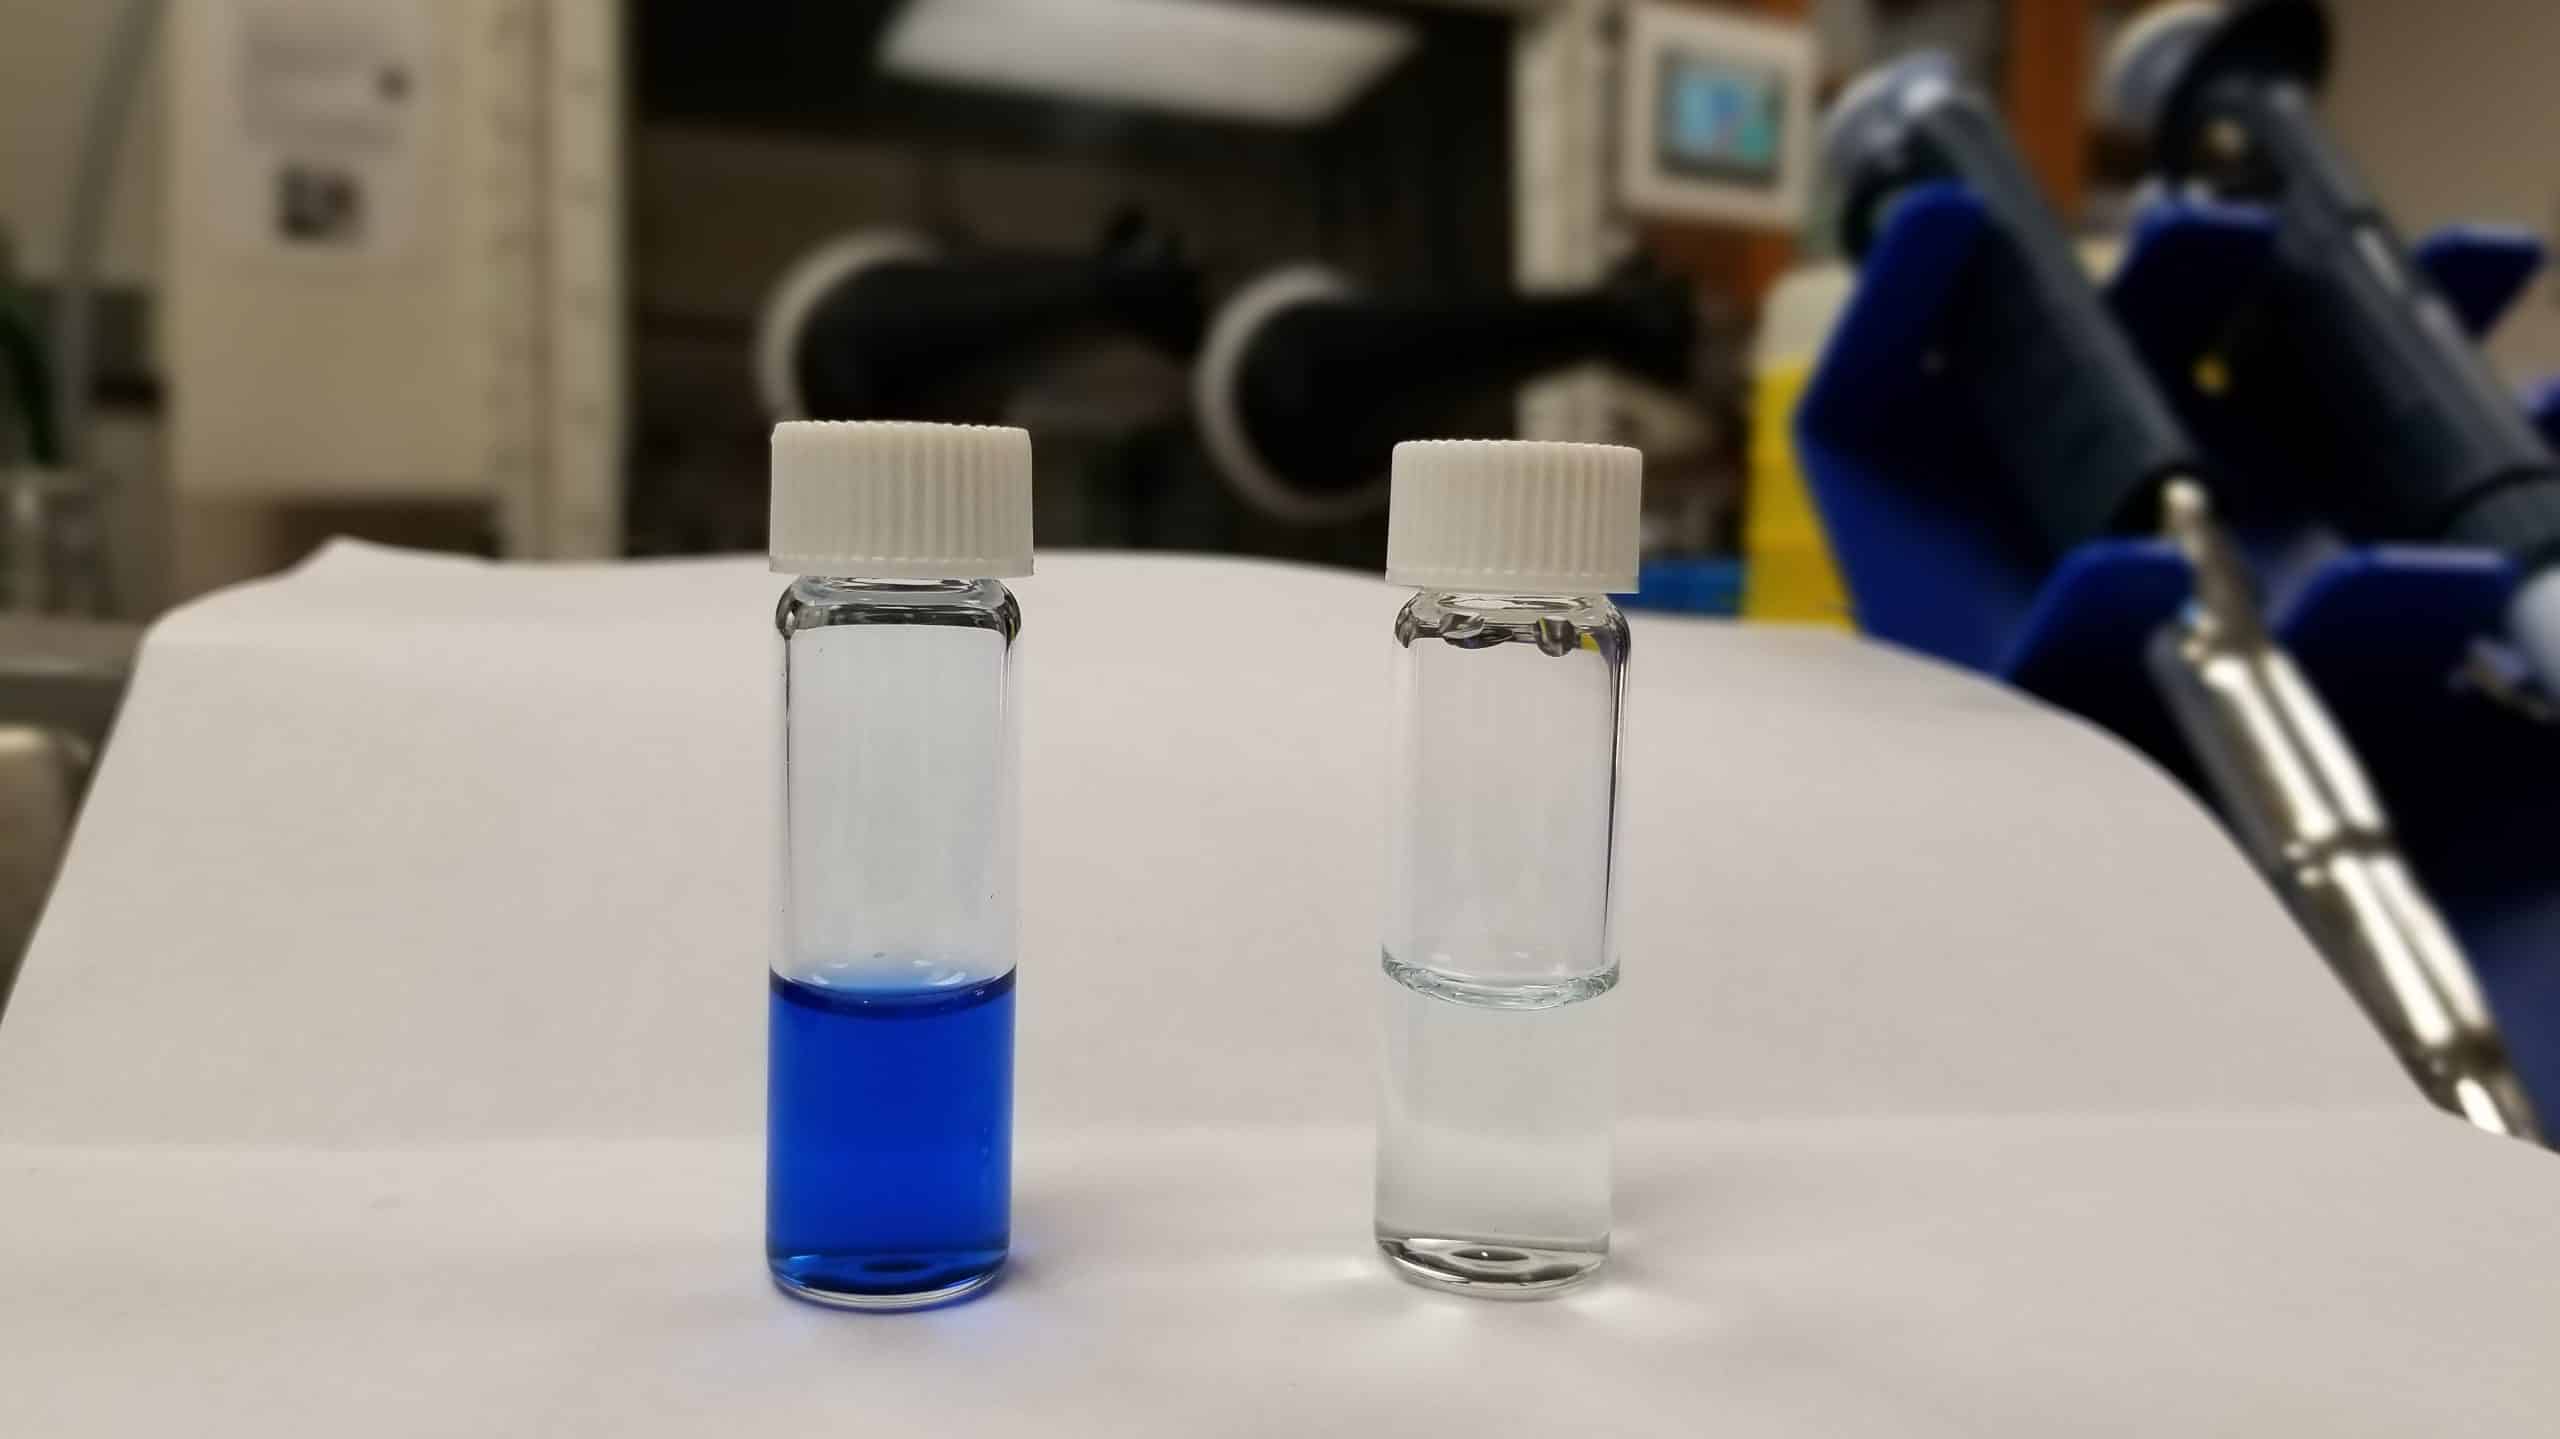 Two vials of water. One on left is colored blue, the one on the right is clear.